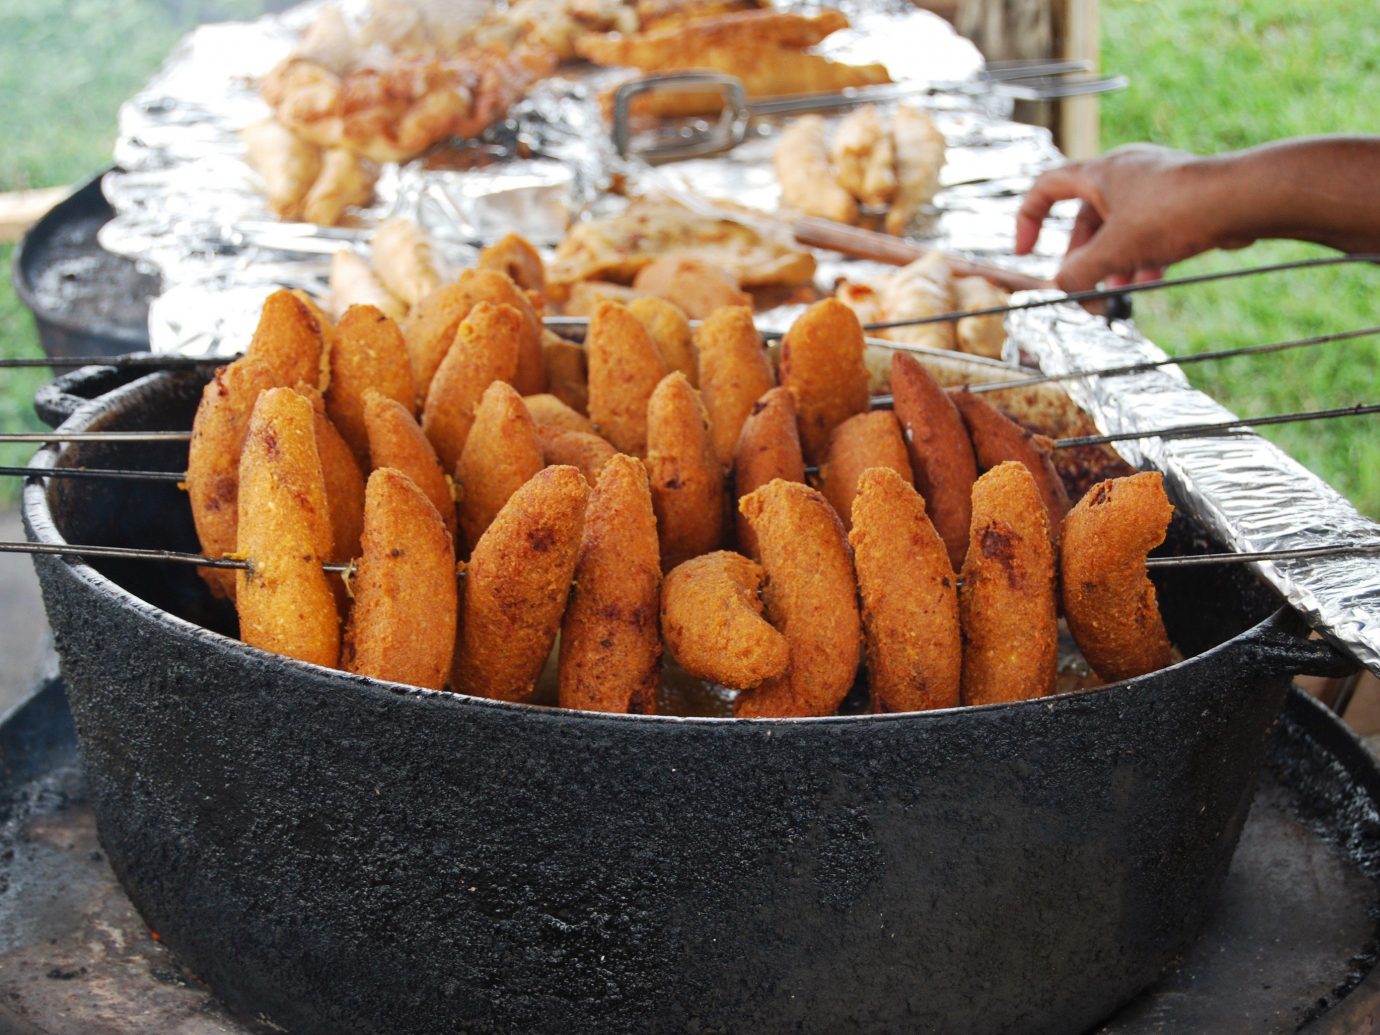 Food + Drink food outdoor dish grilling produce cuisine vegetable fish fruit meat Seafood cooking snack food fried food french fries side dish fresh grill